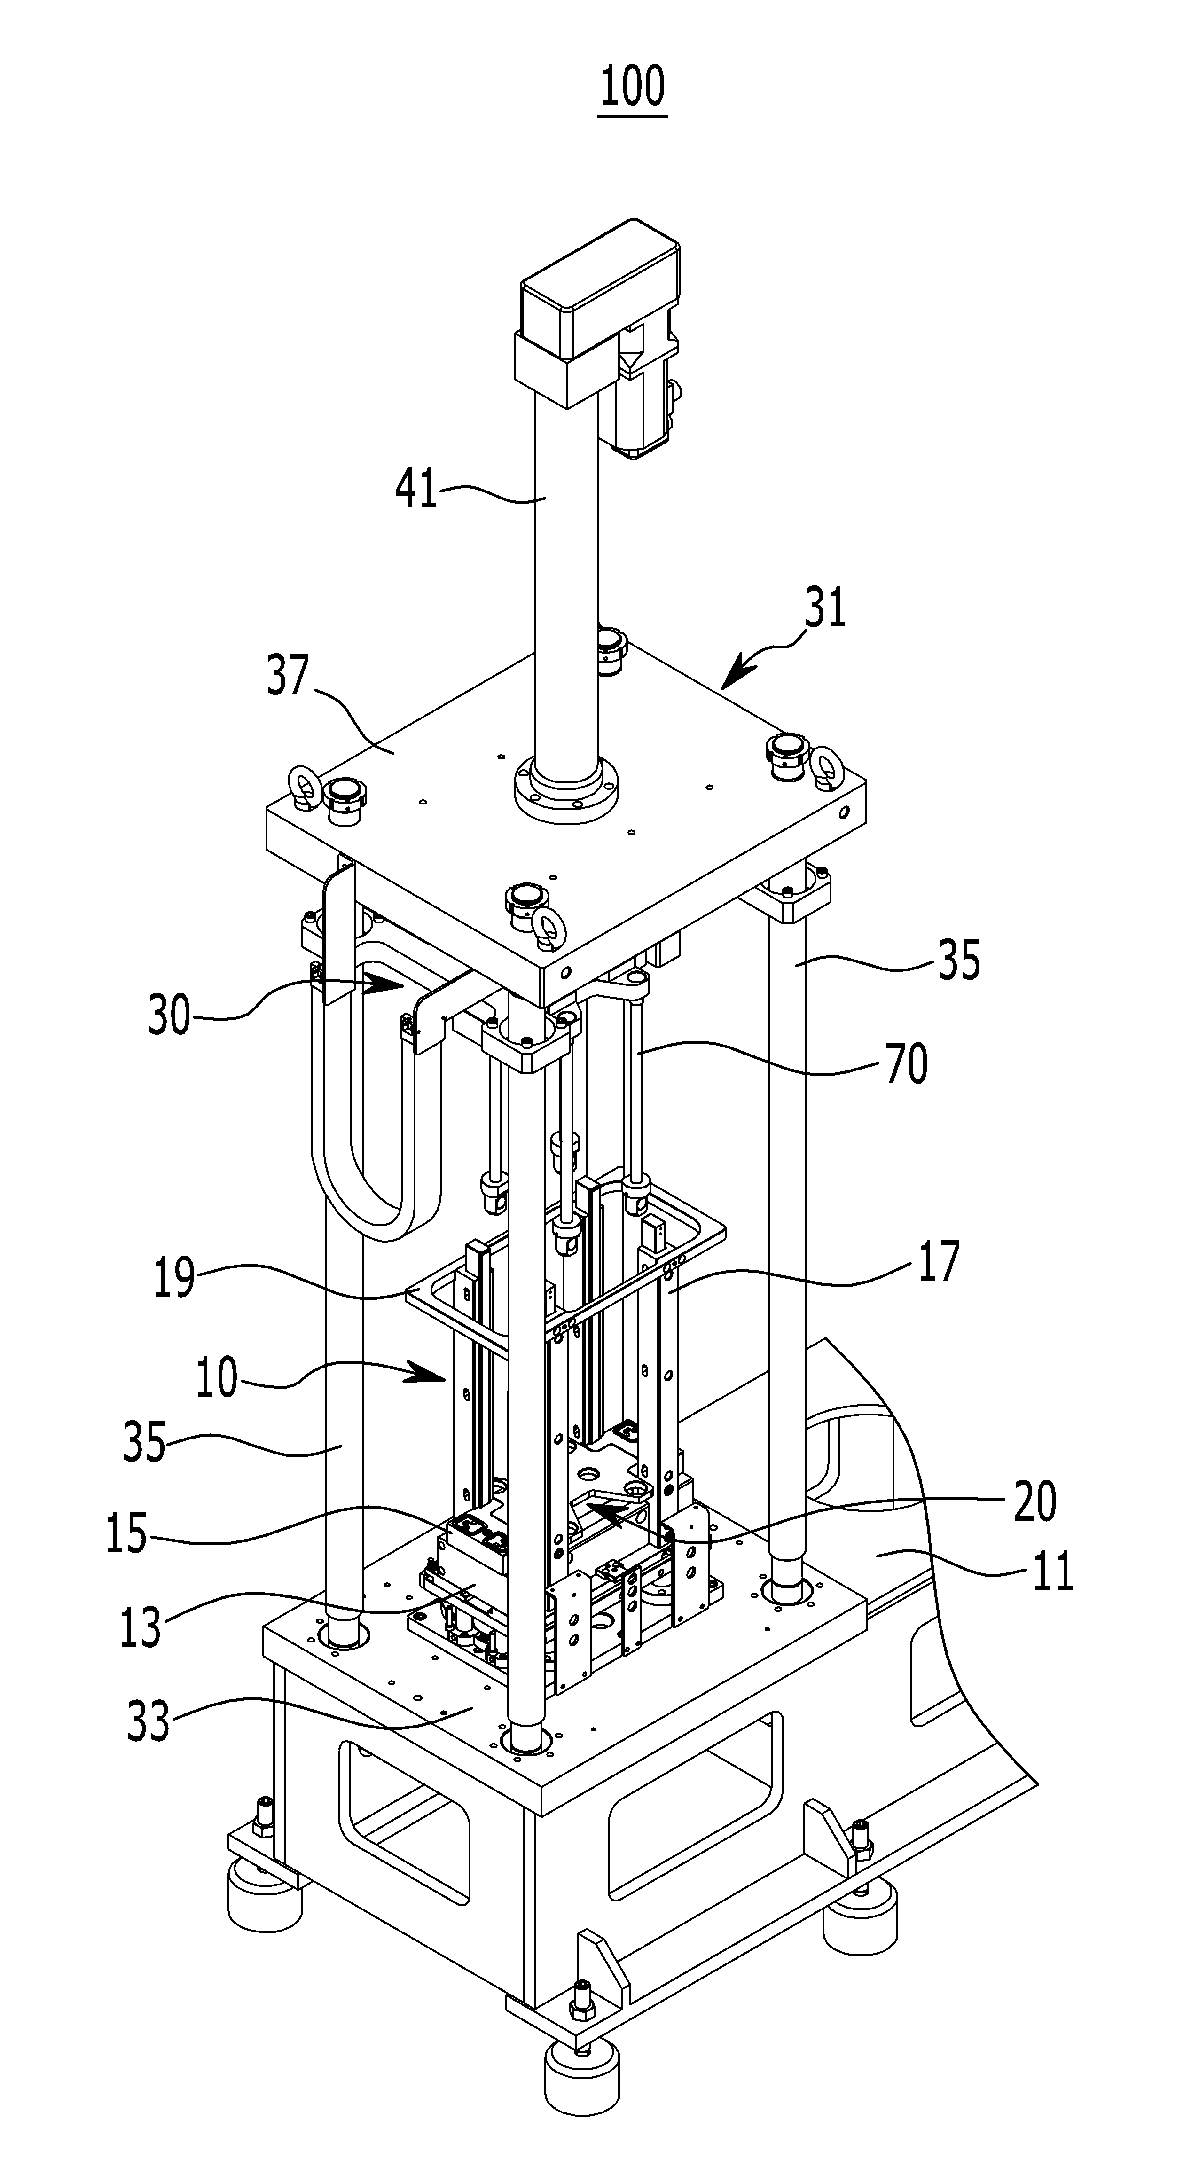 Apparatus for assembling fuel cell stack